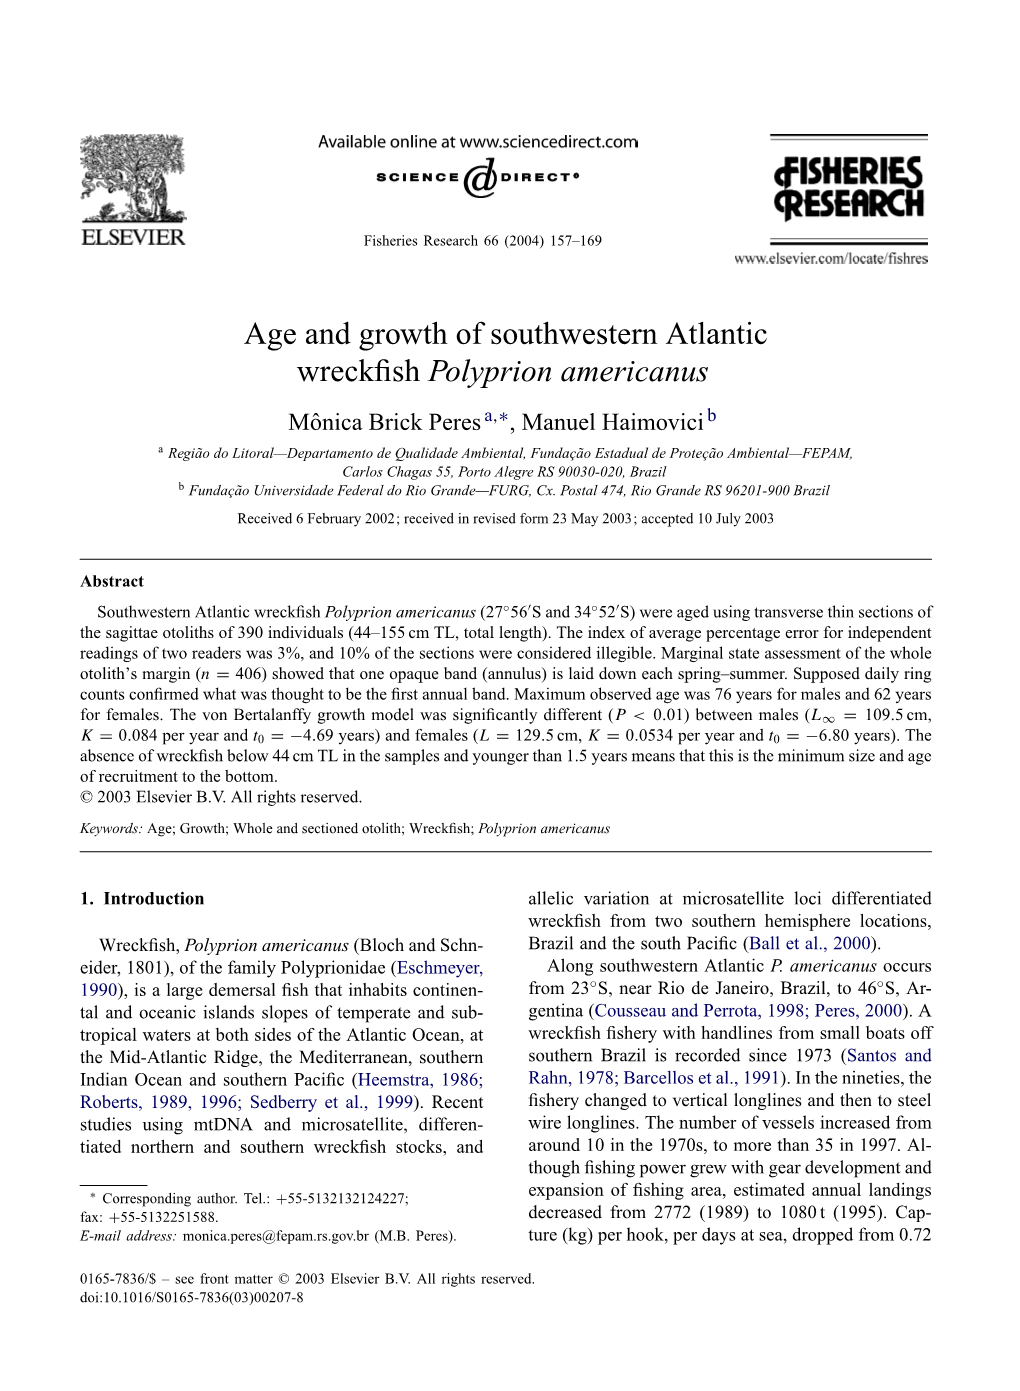 Age and Growth of Southwestern Atlantic Wreckfish Polyprion